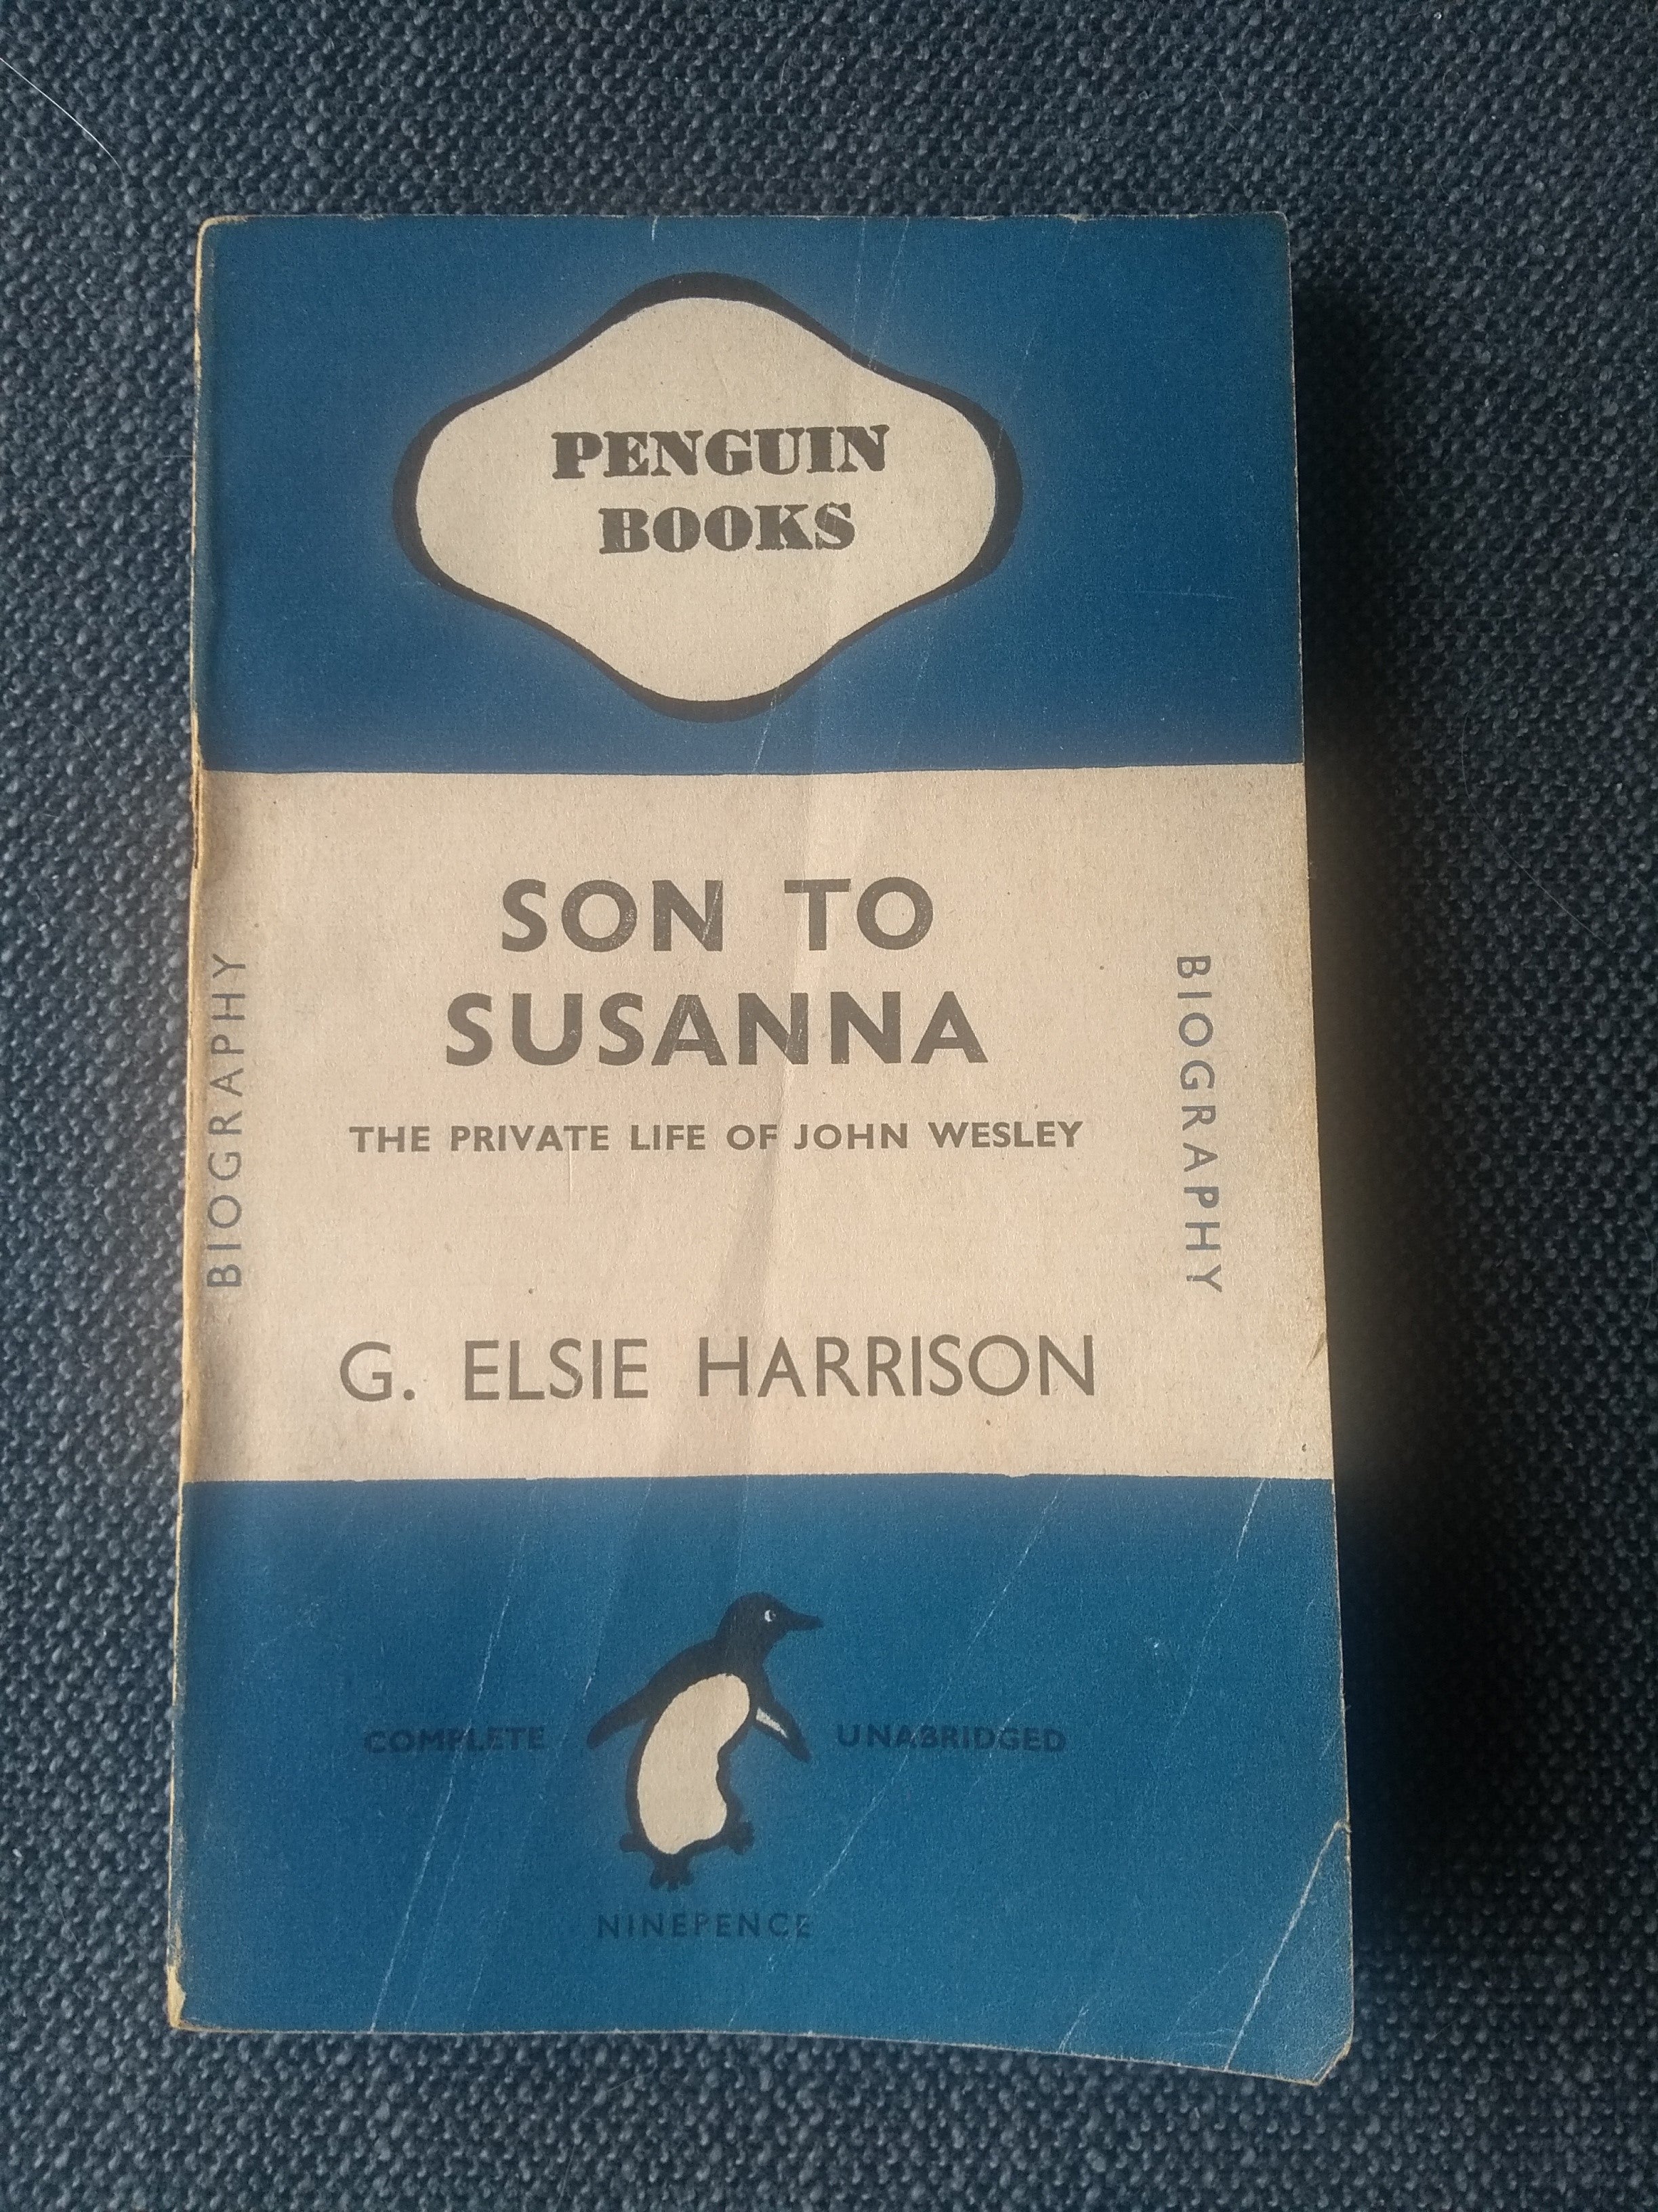 Son To Susanna: The Private Life of John Wesley, by G. Elsie Harrison